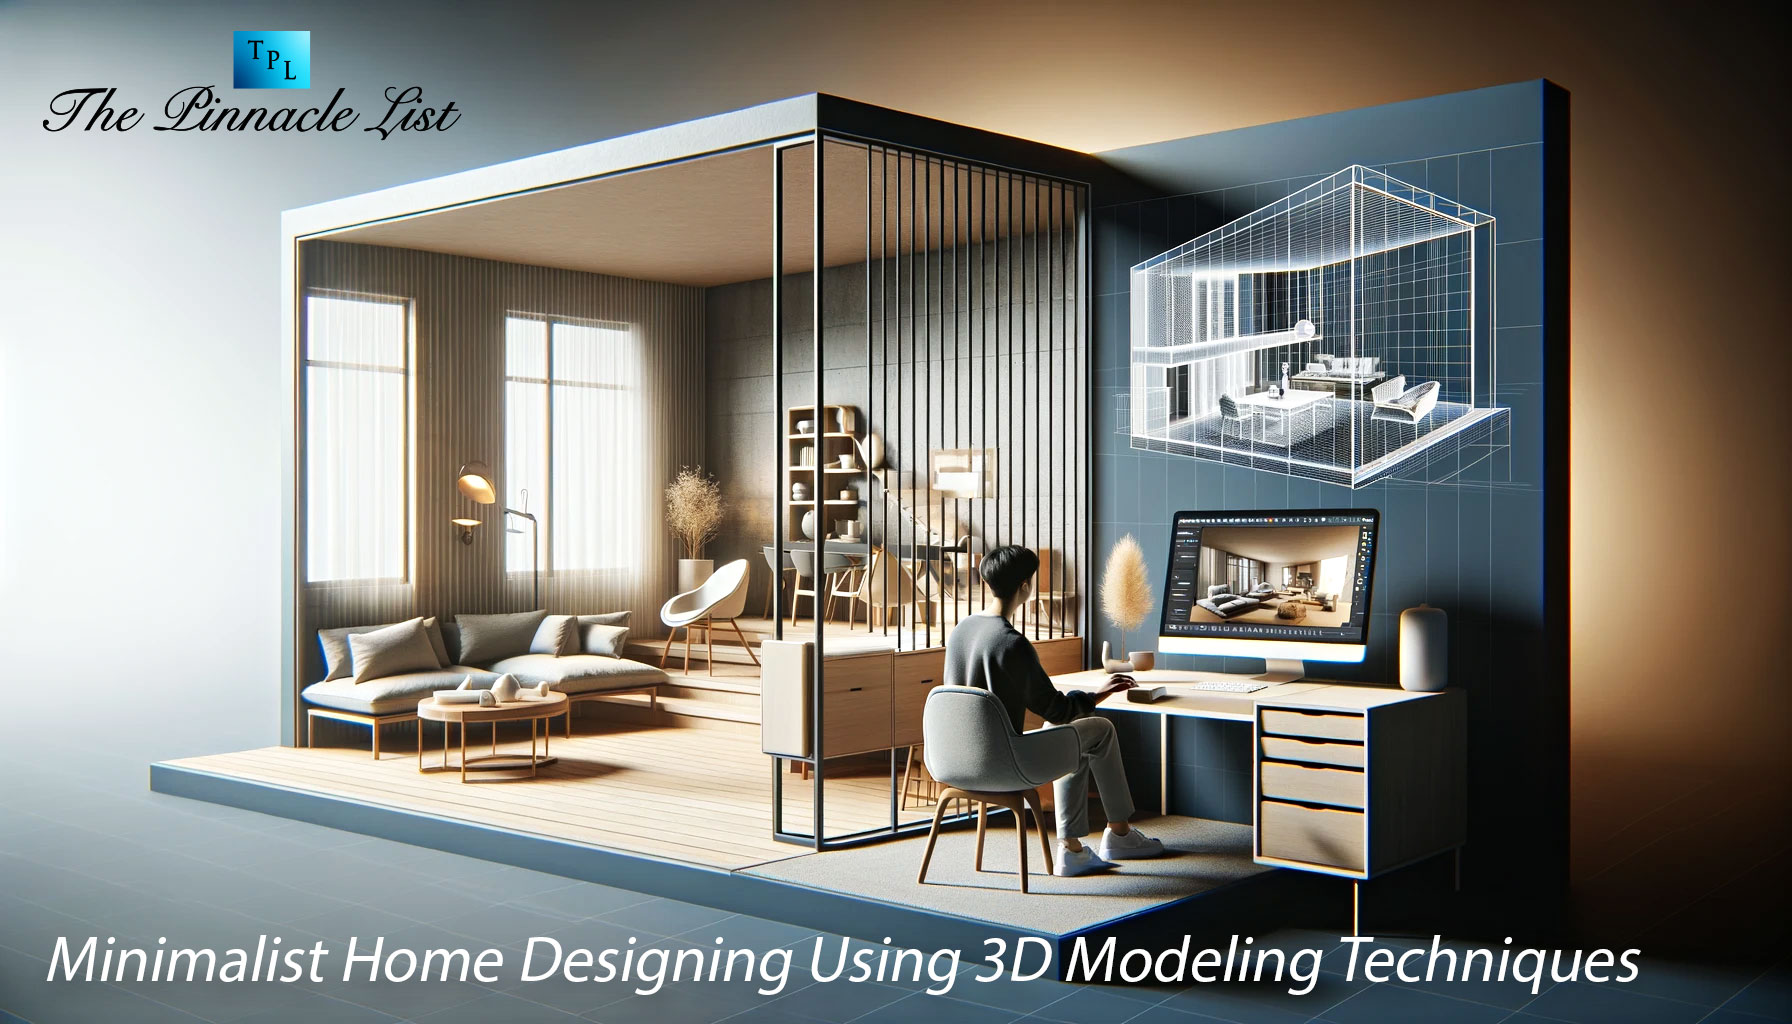 Minimalist Home Designing Using 3D Modeling Techniques